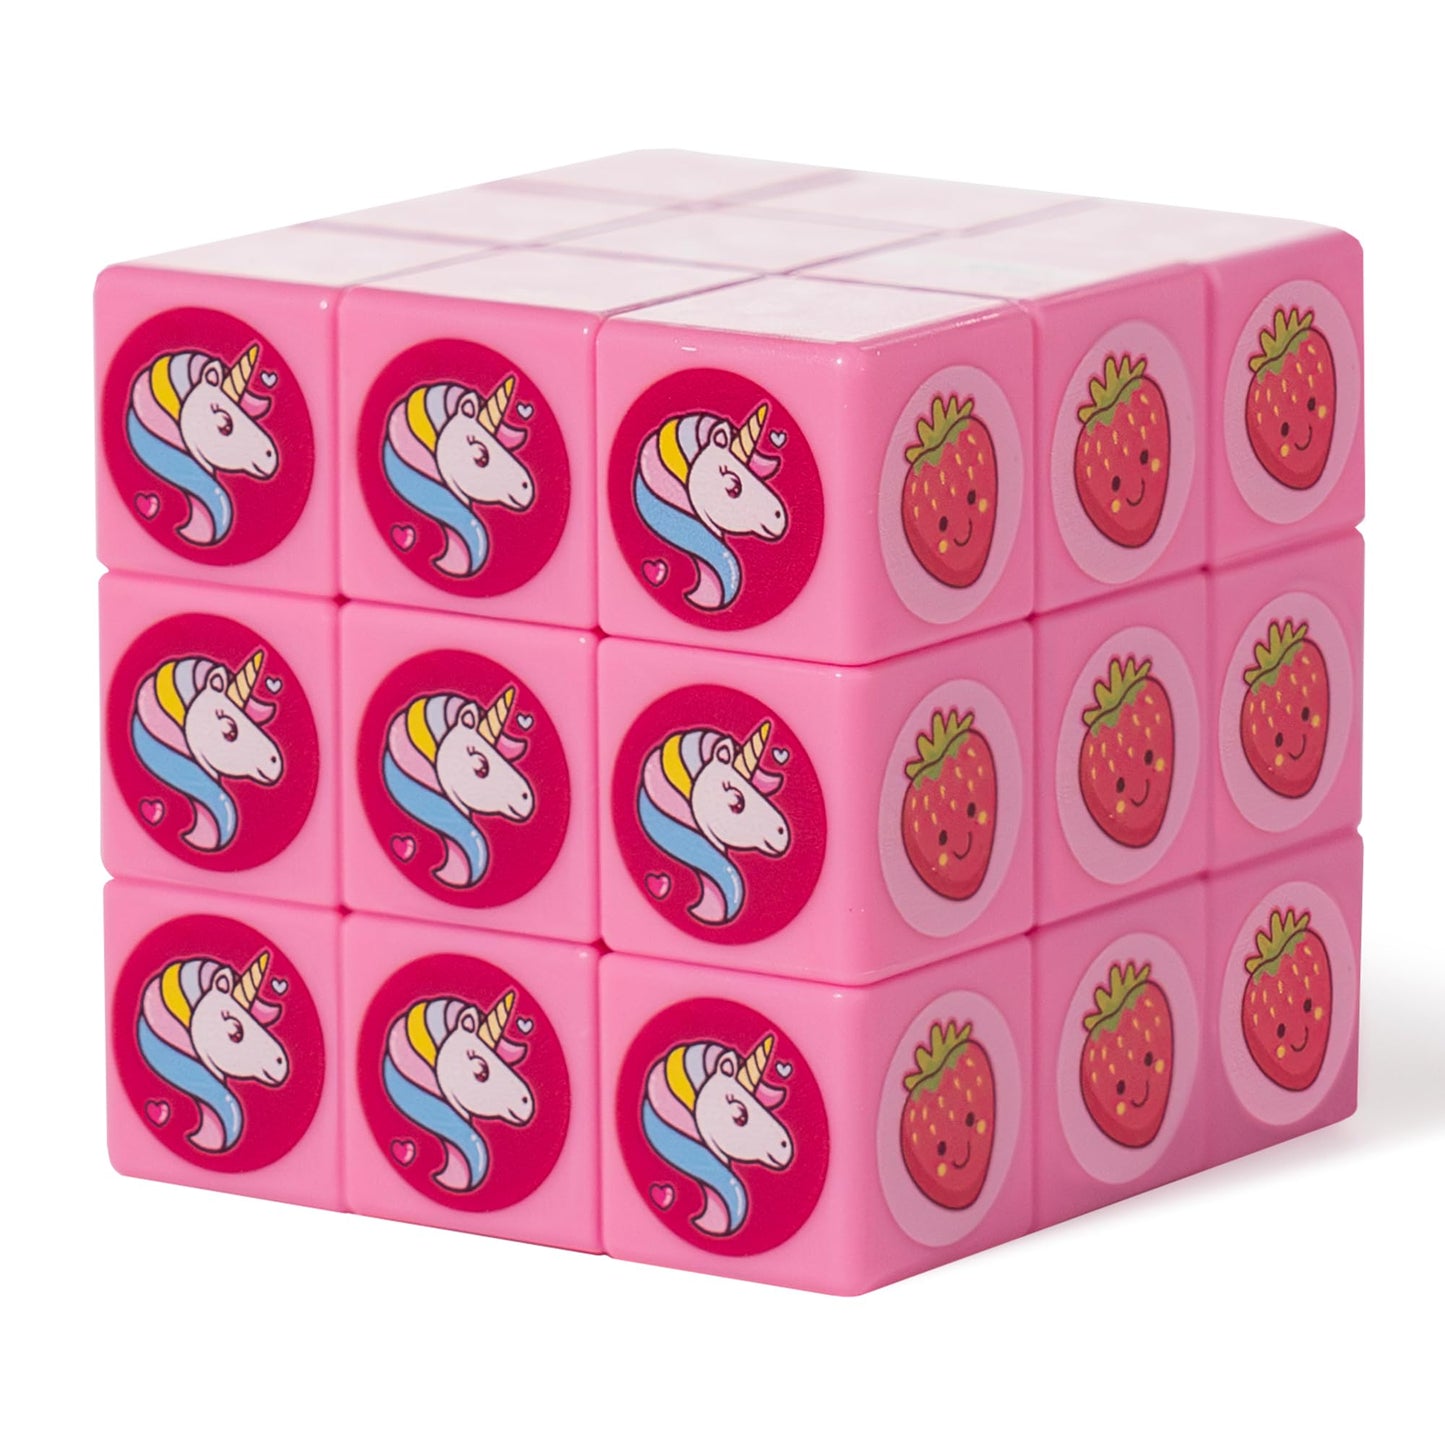 Magic Cube 3x3 for Girls Pink Color and Smooth Stickerless Game Brain for Kids - Educational Smart Fun Puzzle Toy Ideal Gift Birthday The Original Little Unicorn Item Room Decor - amzGamess